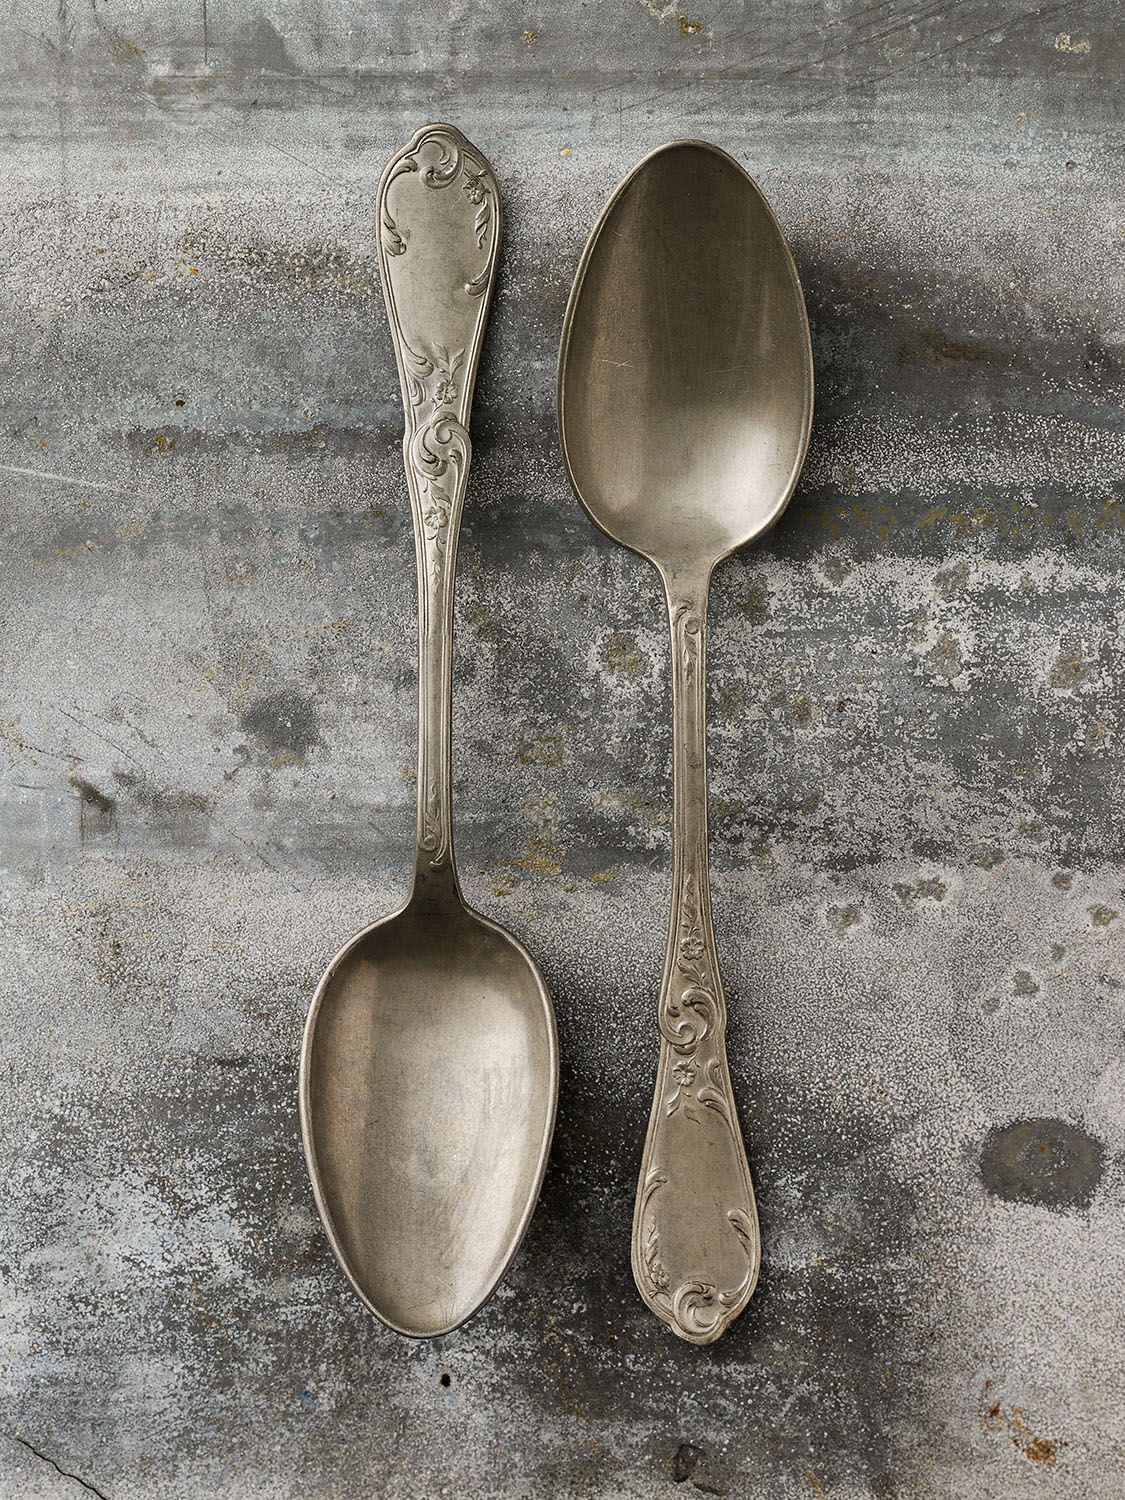 #4 Two French Spoons